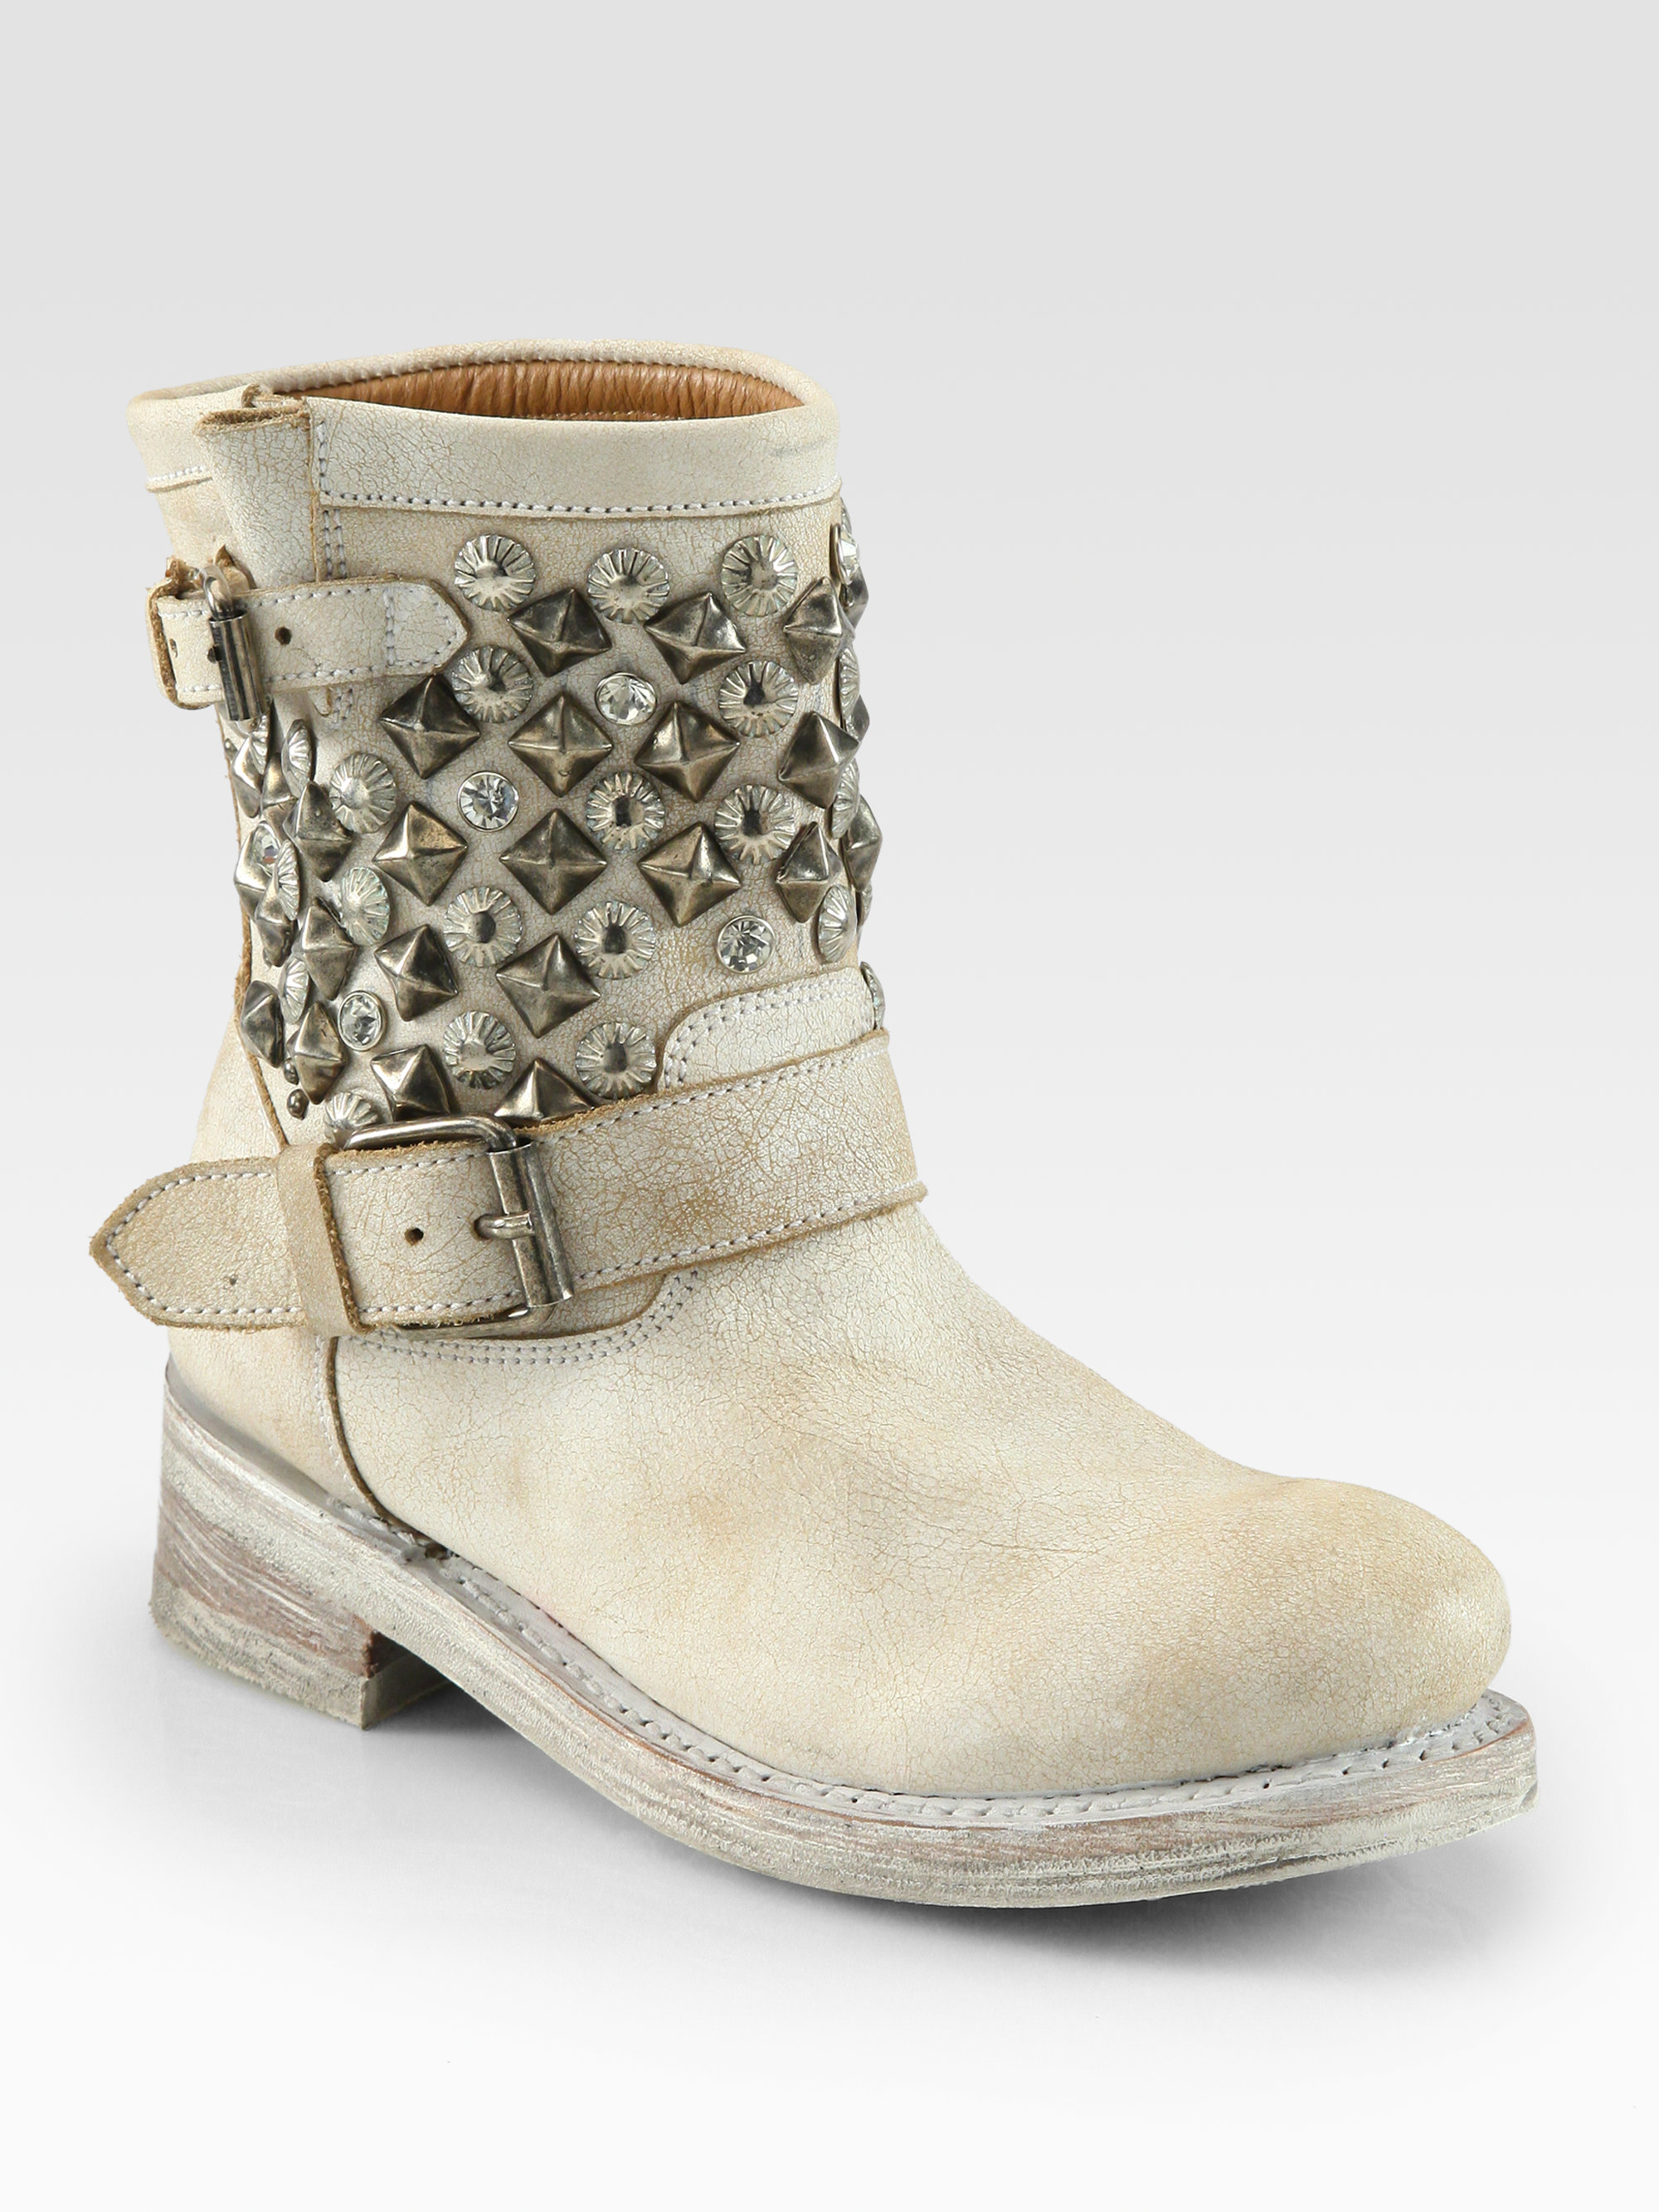 Ash Titan Studded Leather Motorcycle Boots in Taupe